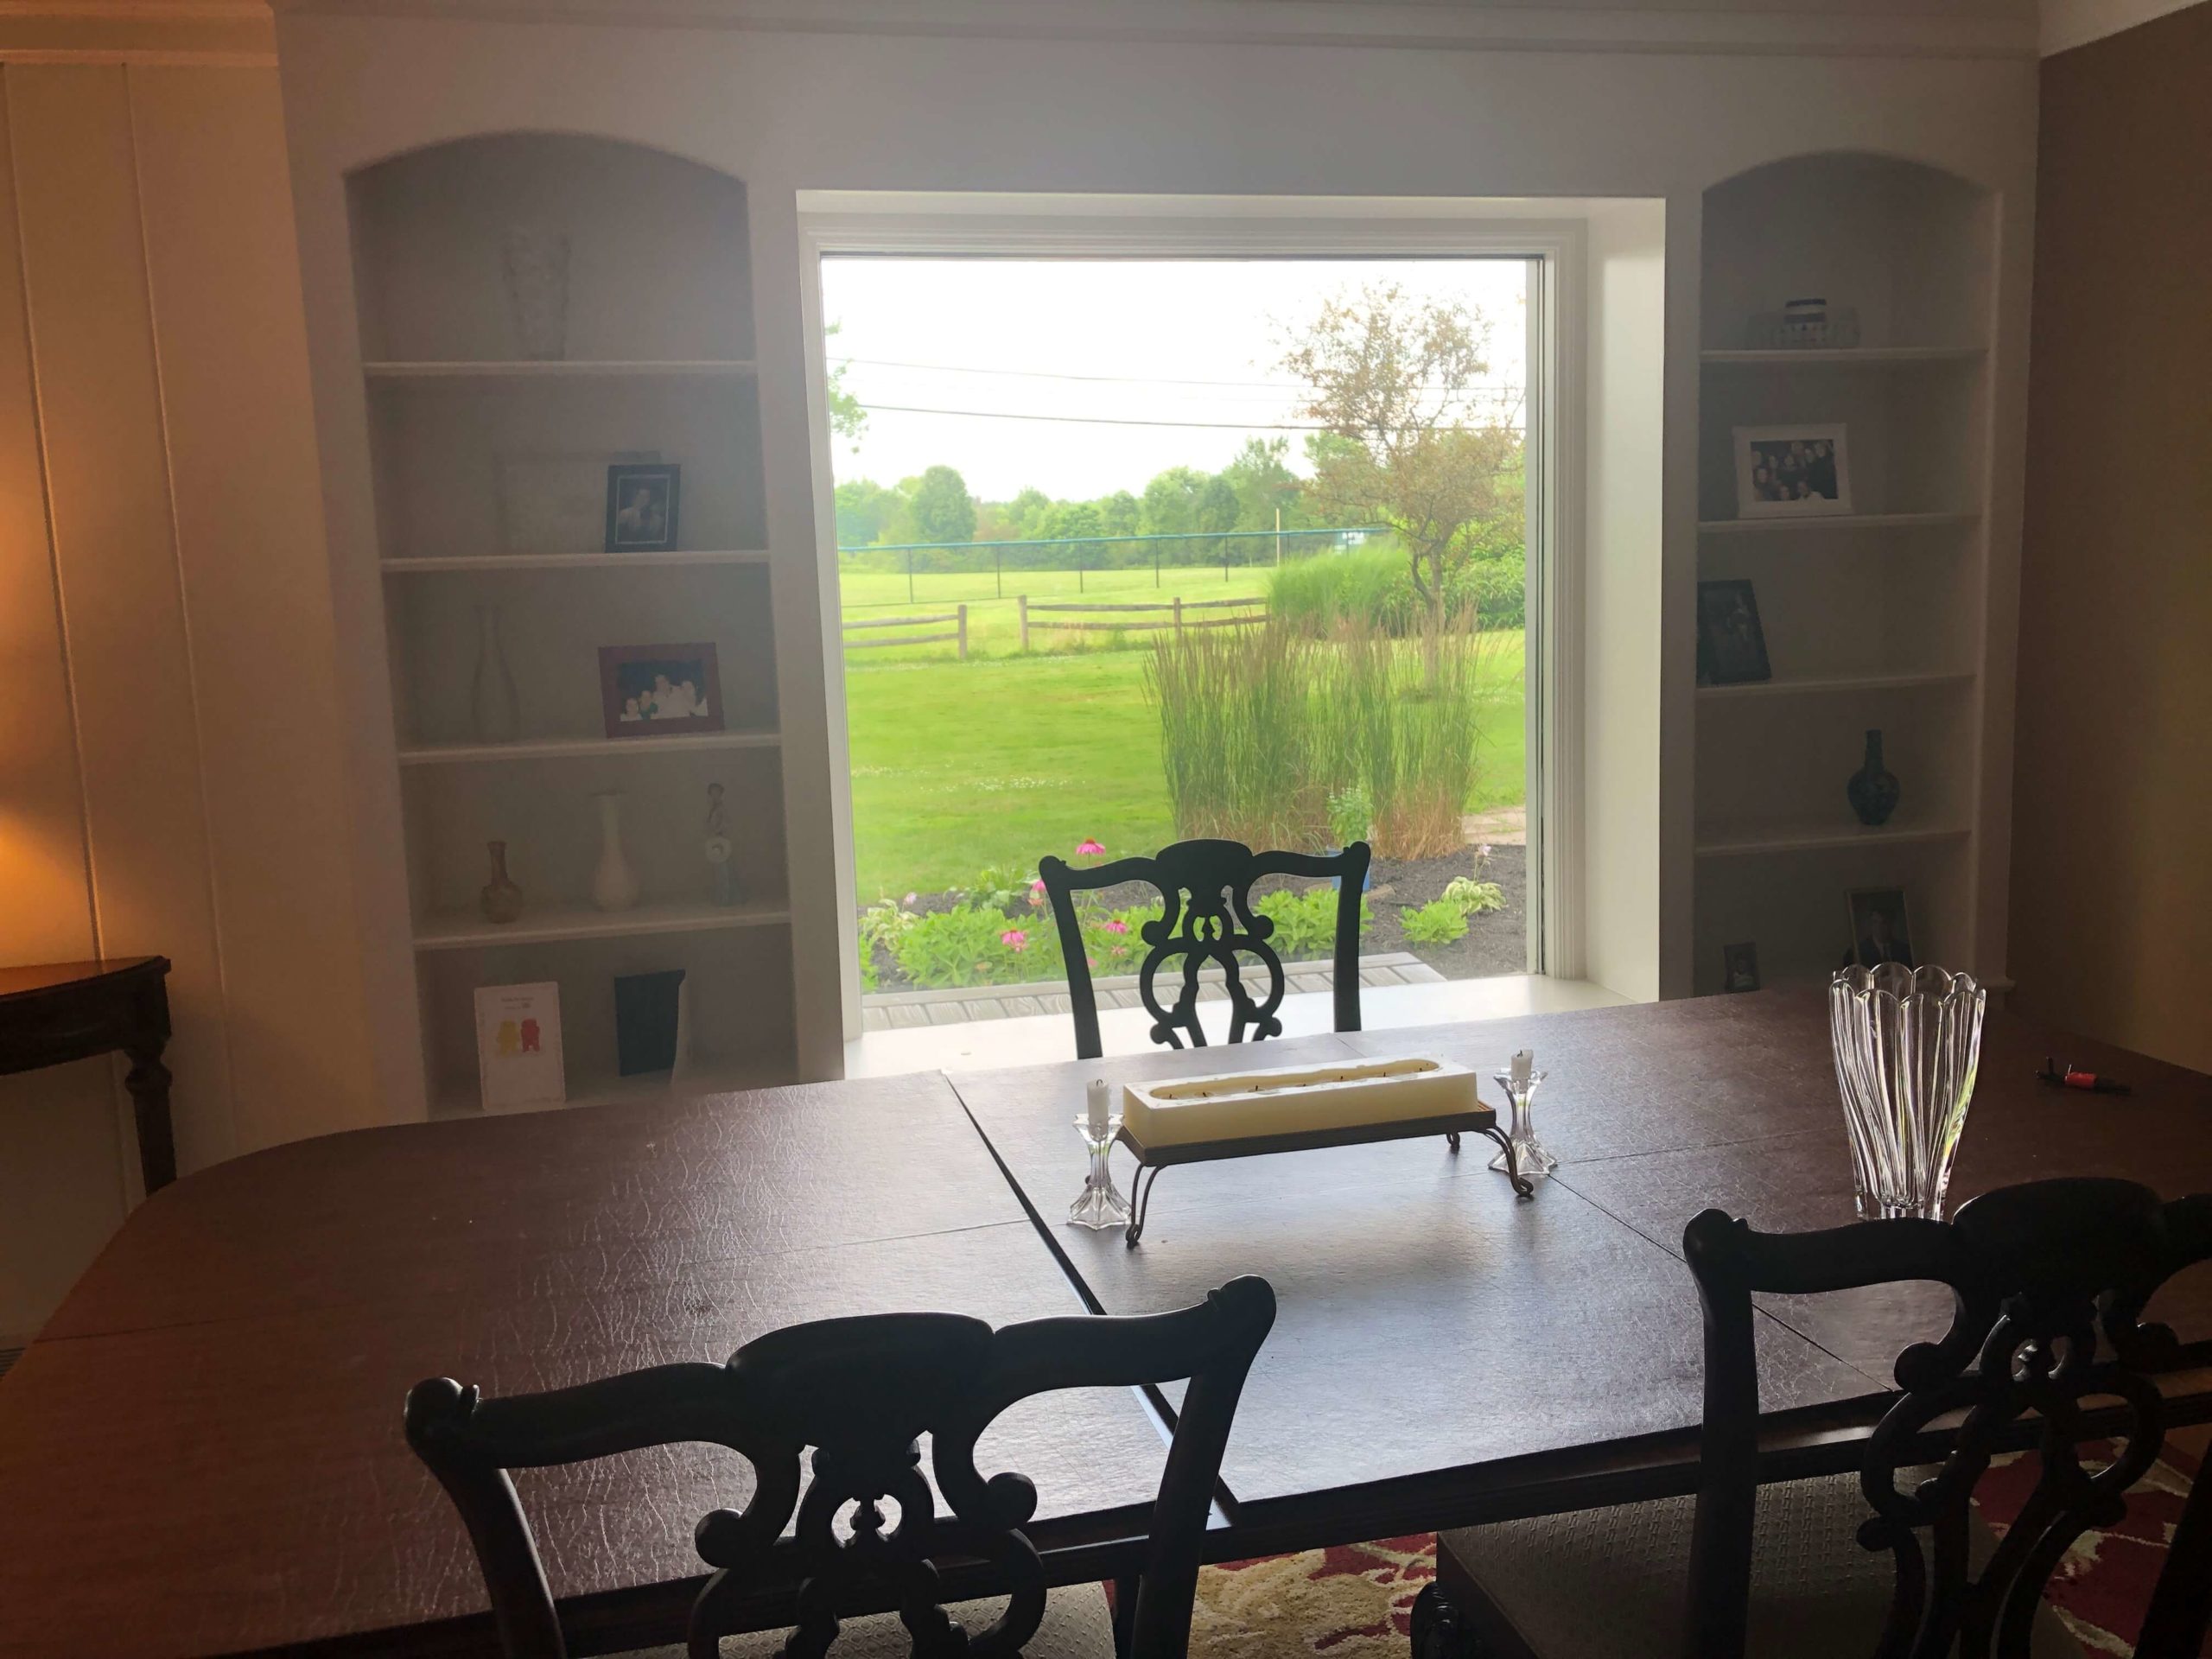 Dining Room Built-in Shelves Before Eclectic Interiors Hudson OH